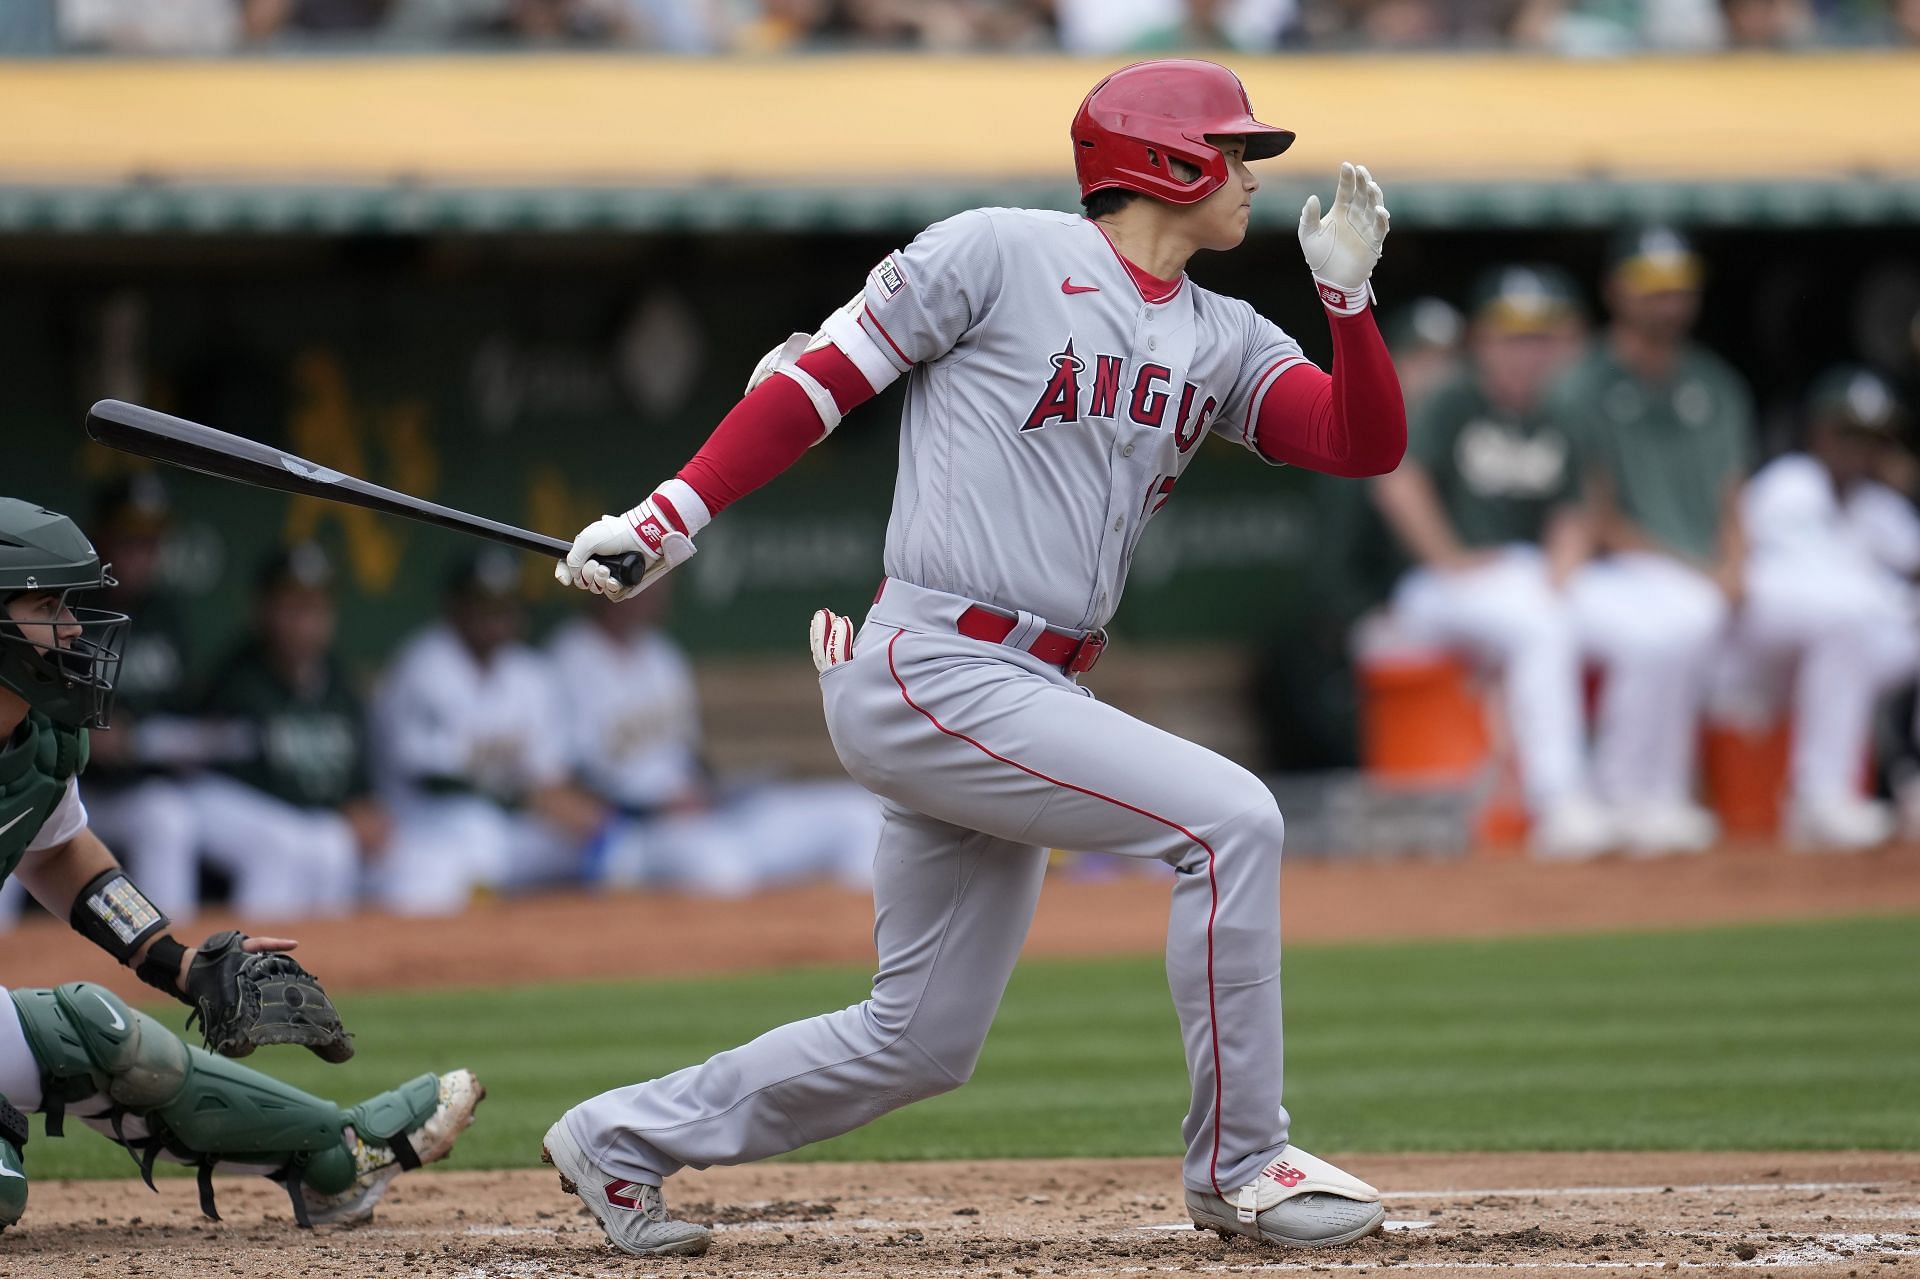 Did the Los Angeles Angeles use a body double for Shohei Ohtani